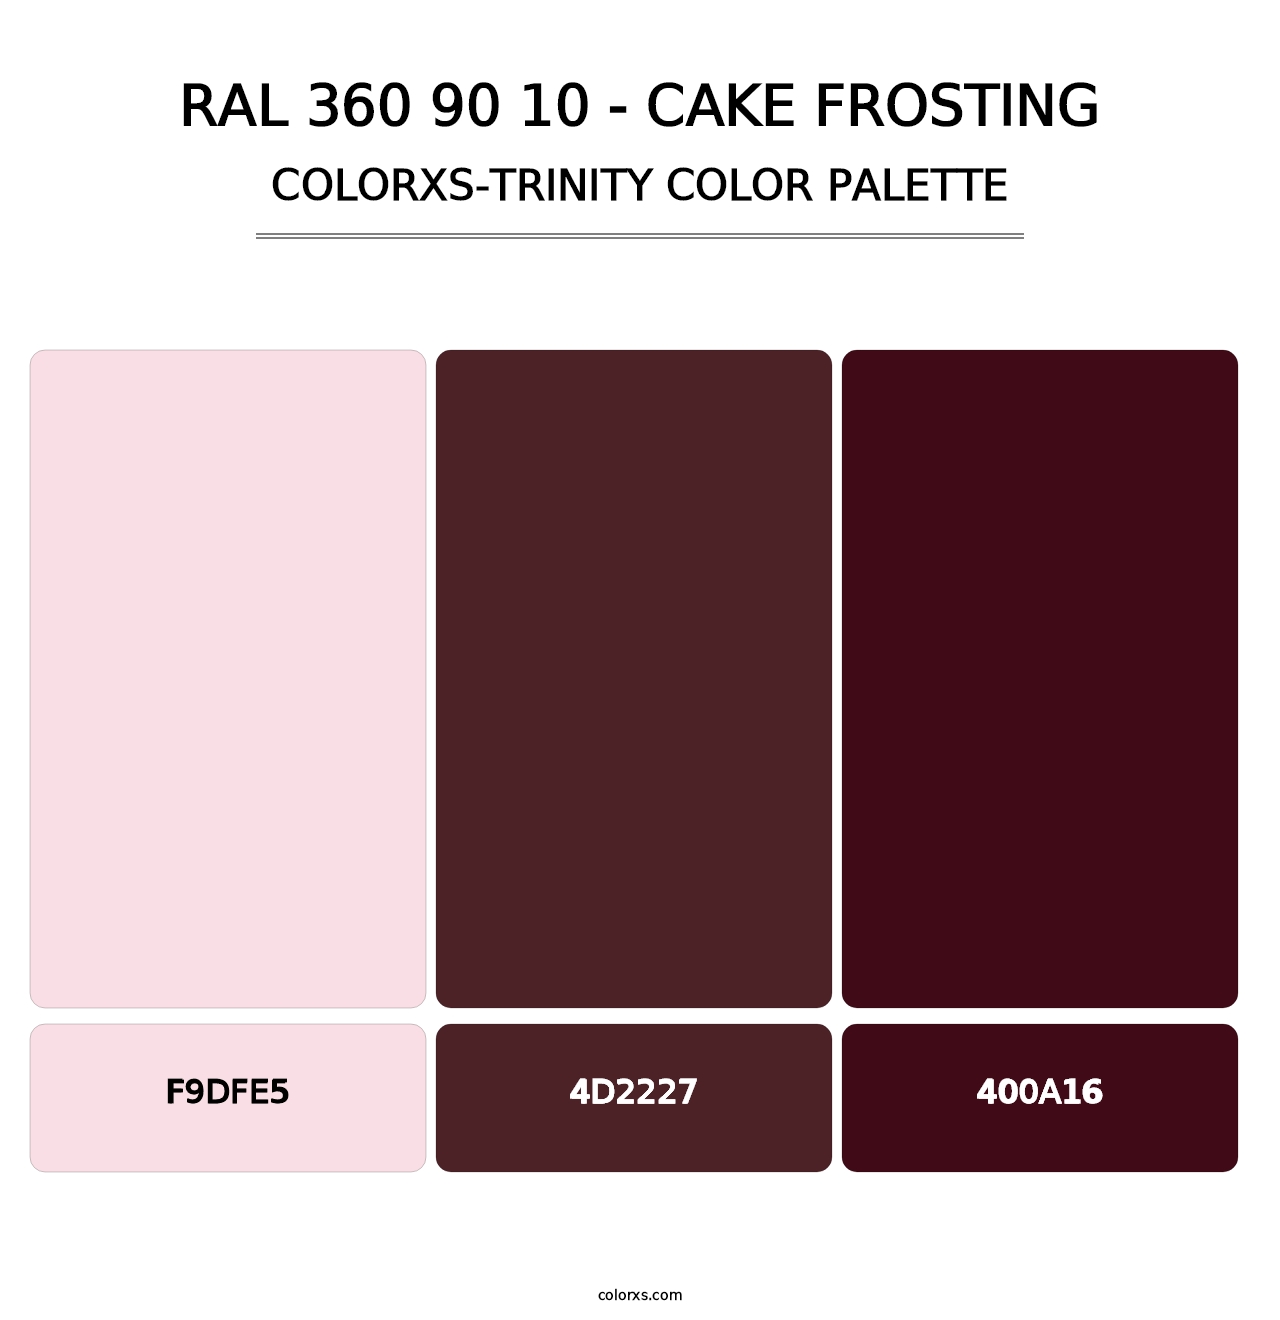 RAL 360 90 10 - Cake Frosting - Colorxs Trinity Palette